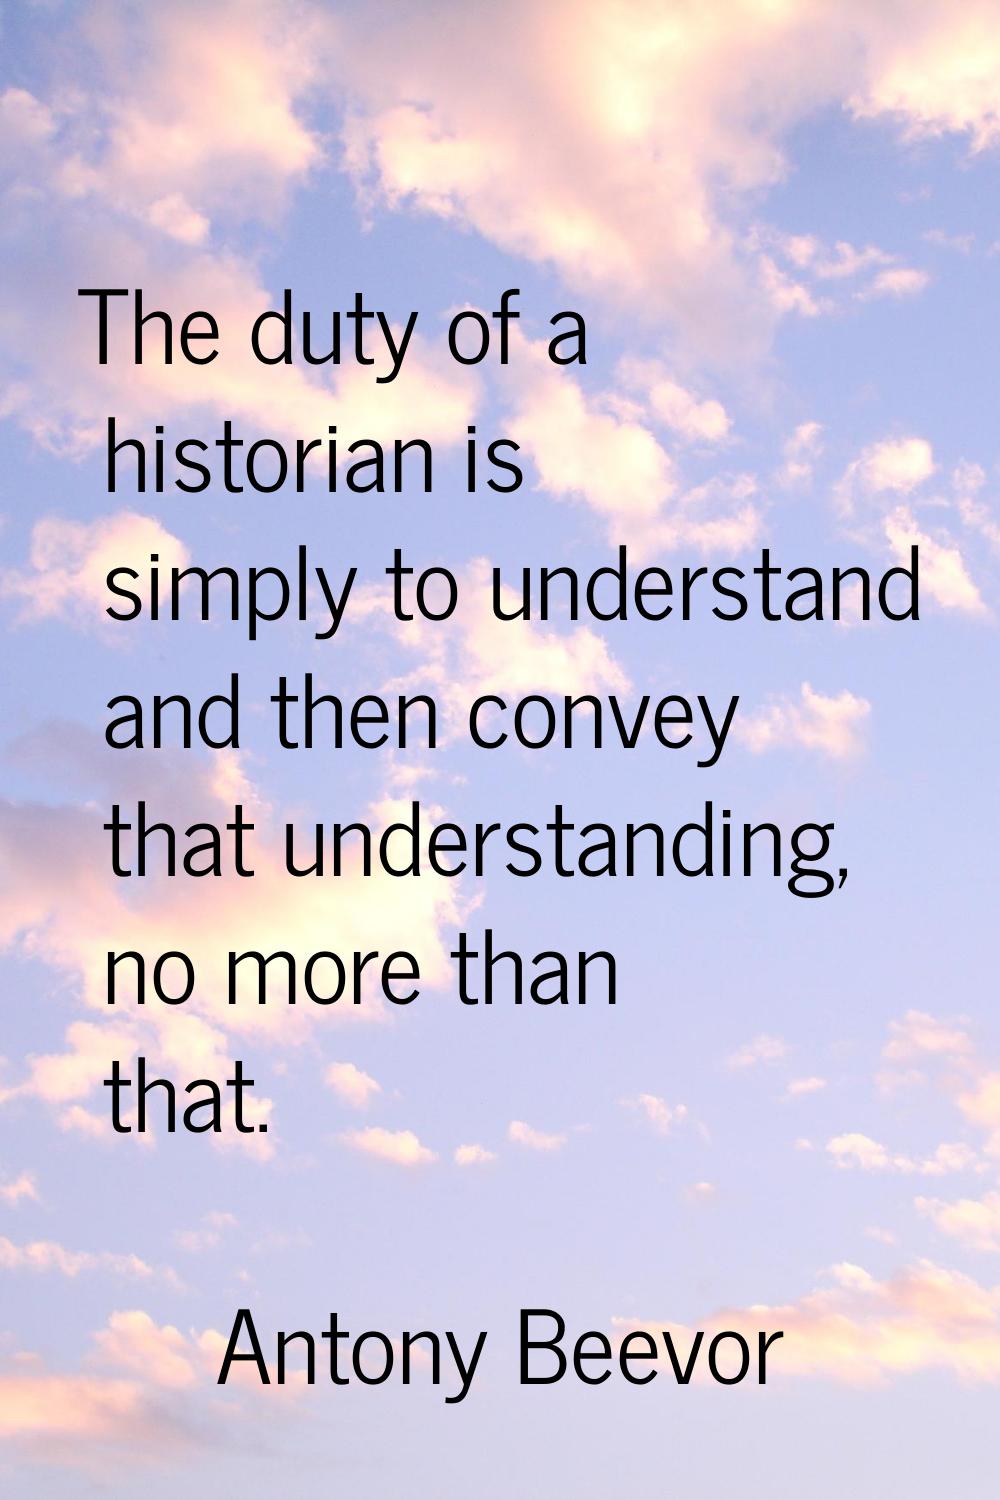 The duty of a historian is simply to understand and then convey that understanding, no more than th